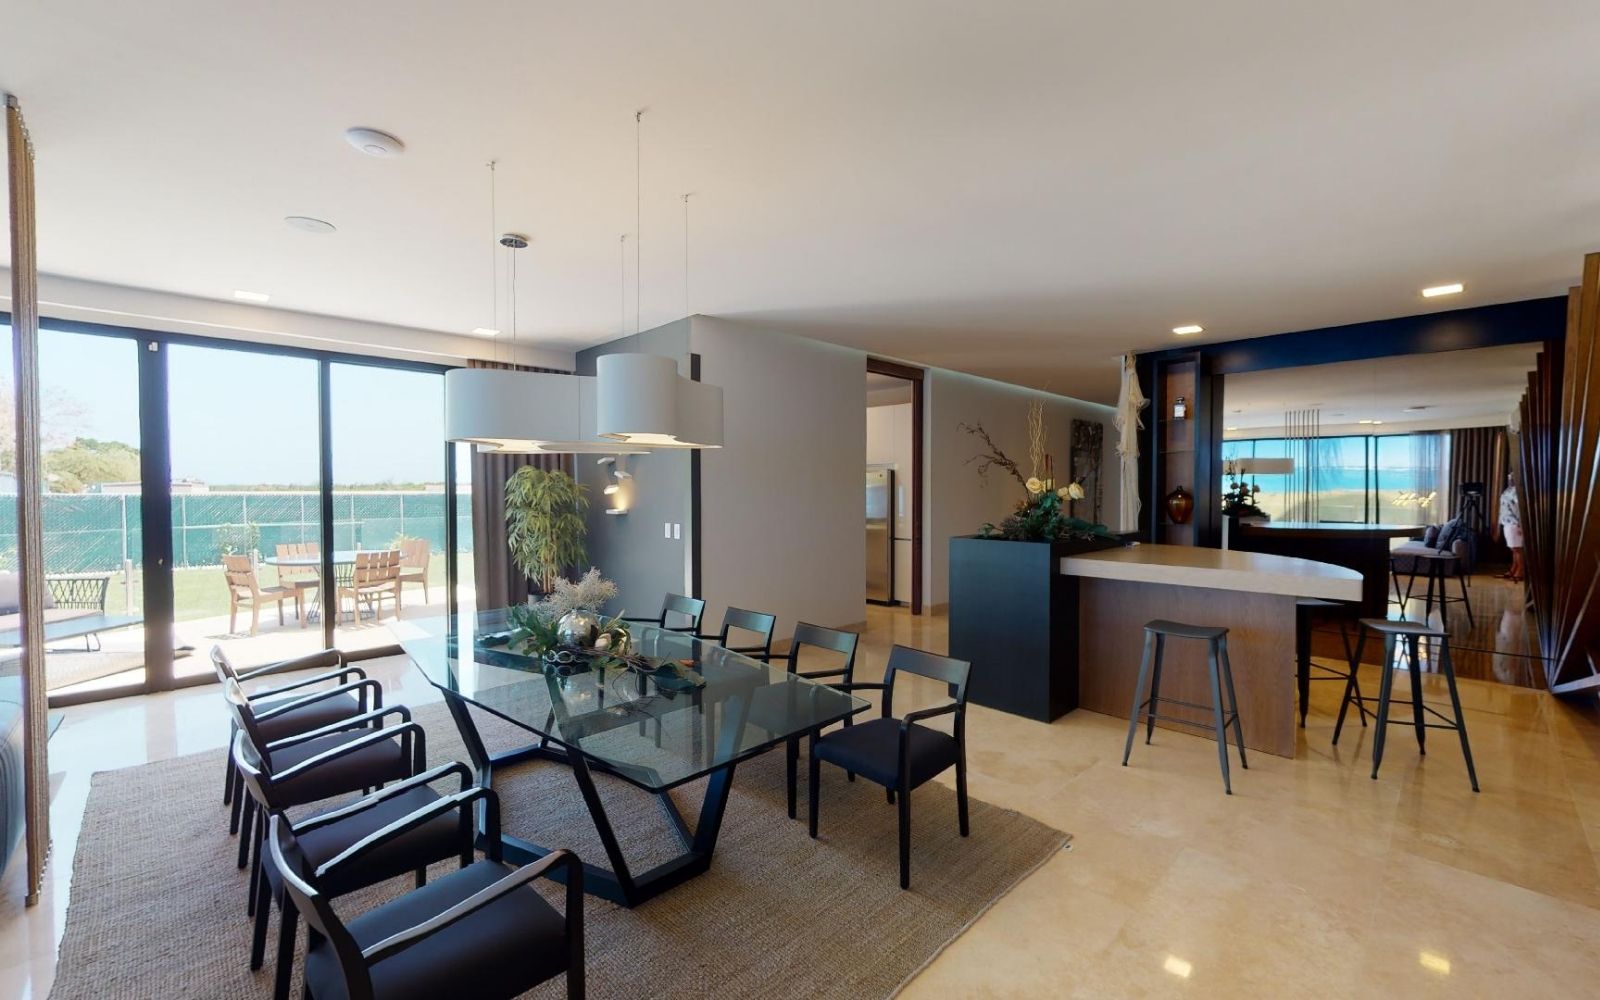 4 bedroom apartment facing the sea in Cancun.